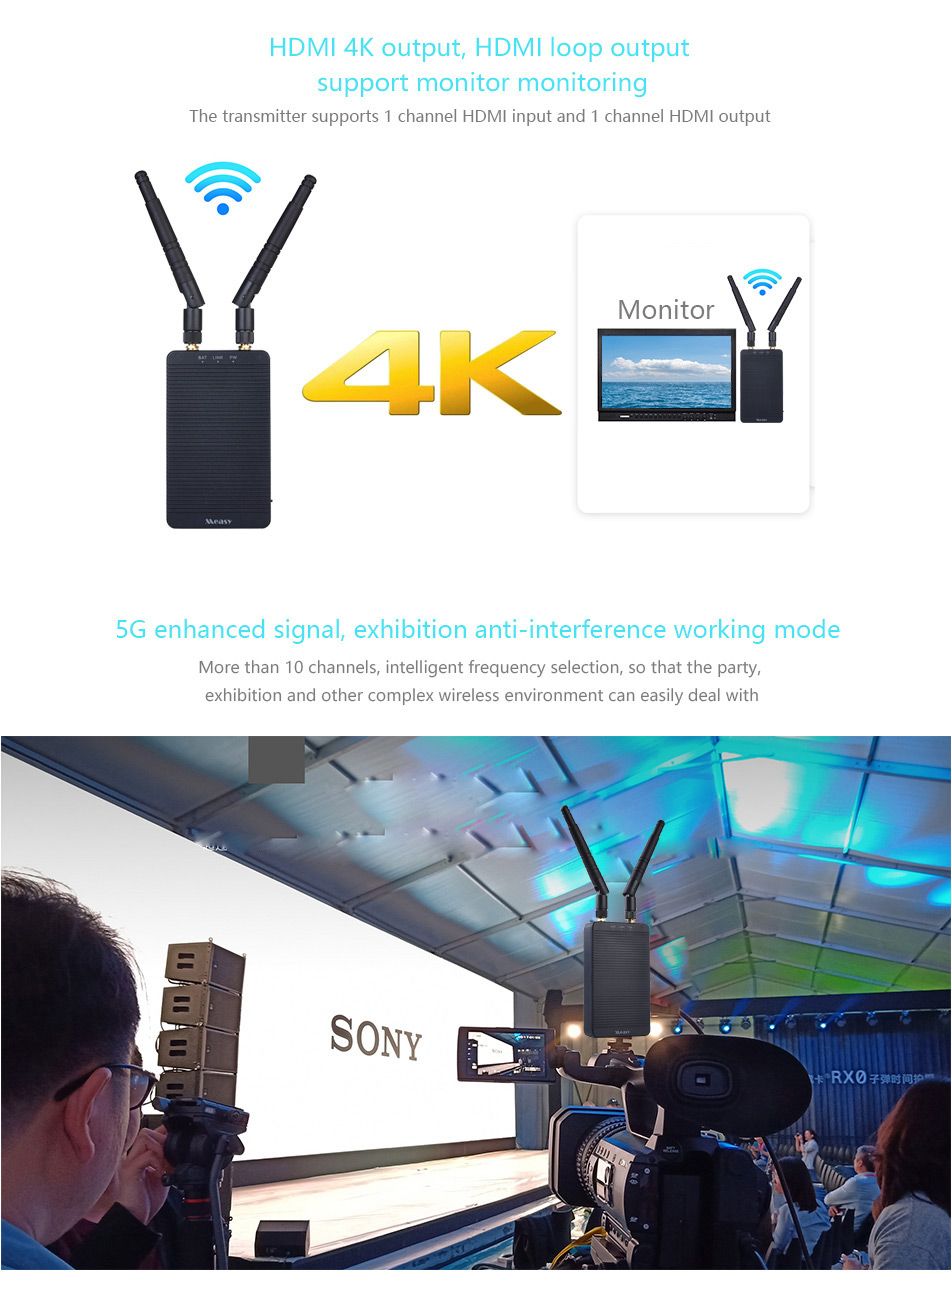 Measy-Tour-T1-4K-HD-200M-Wireless-HDMI-Video-Transmission-System-5G-Image-Transmitter-and-Receiver-K-1706983